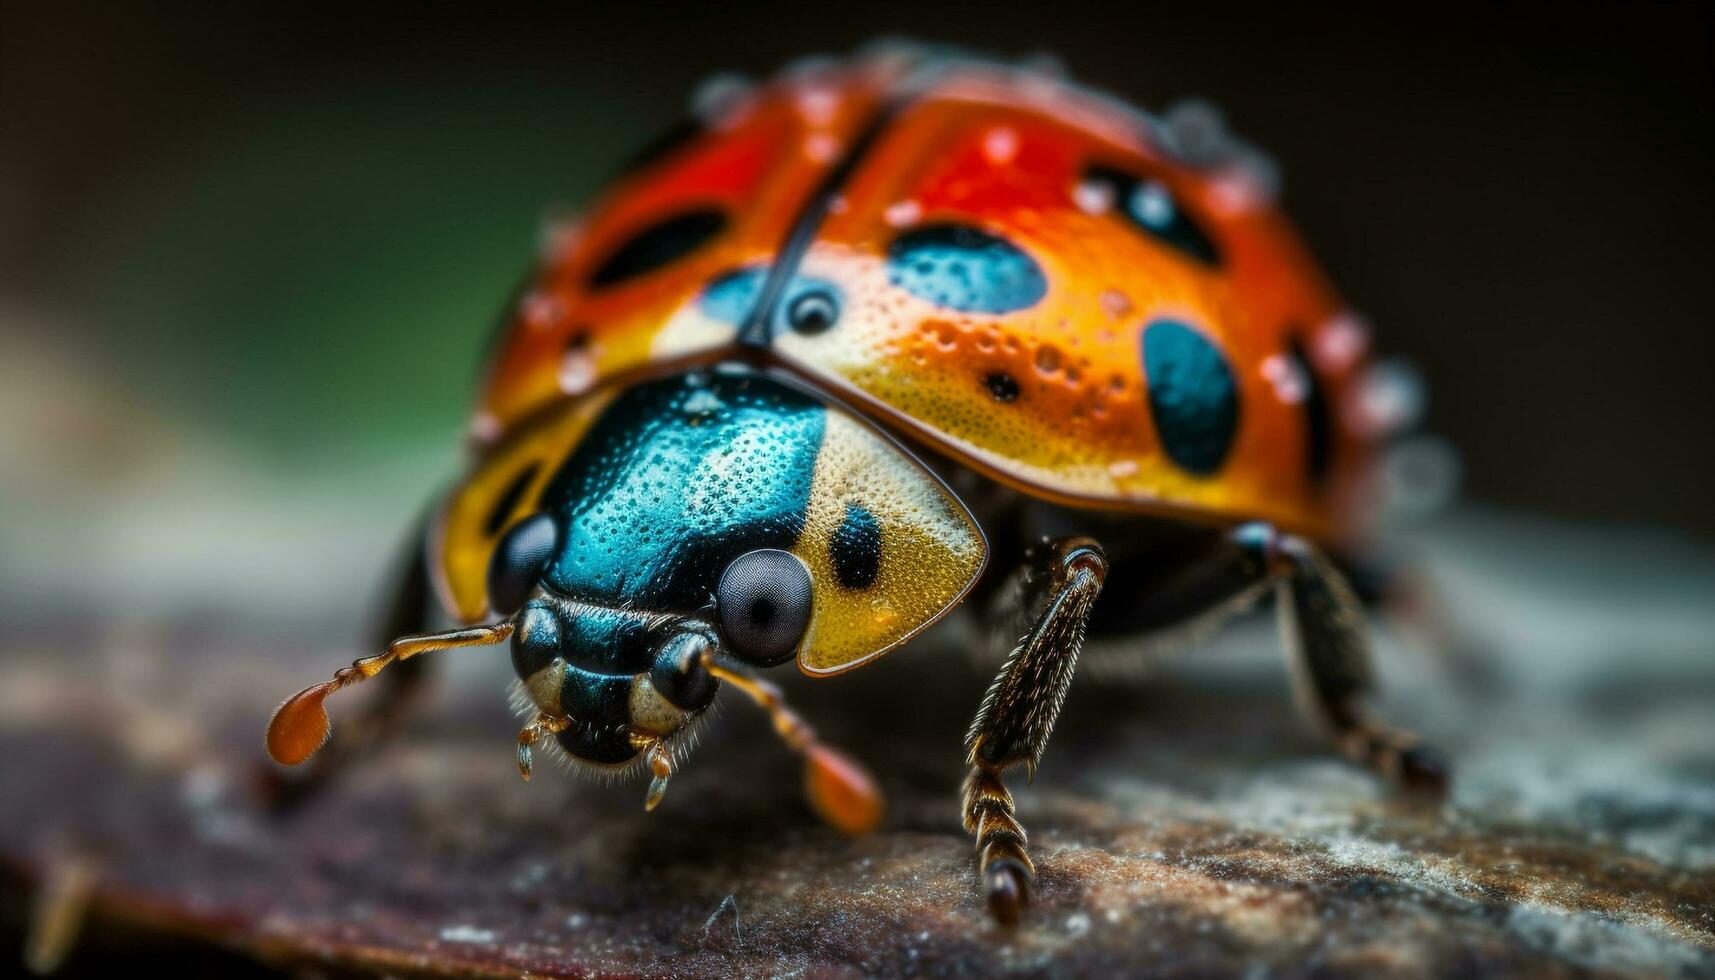 Spotted ladybug crawling on green leaf, beauty in nature details generated by AI photo